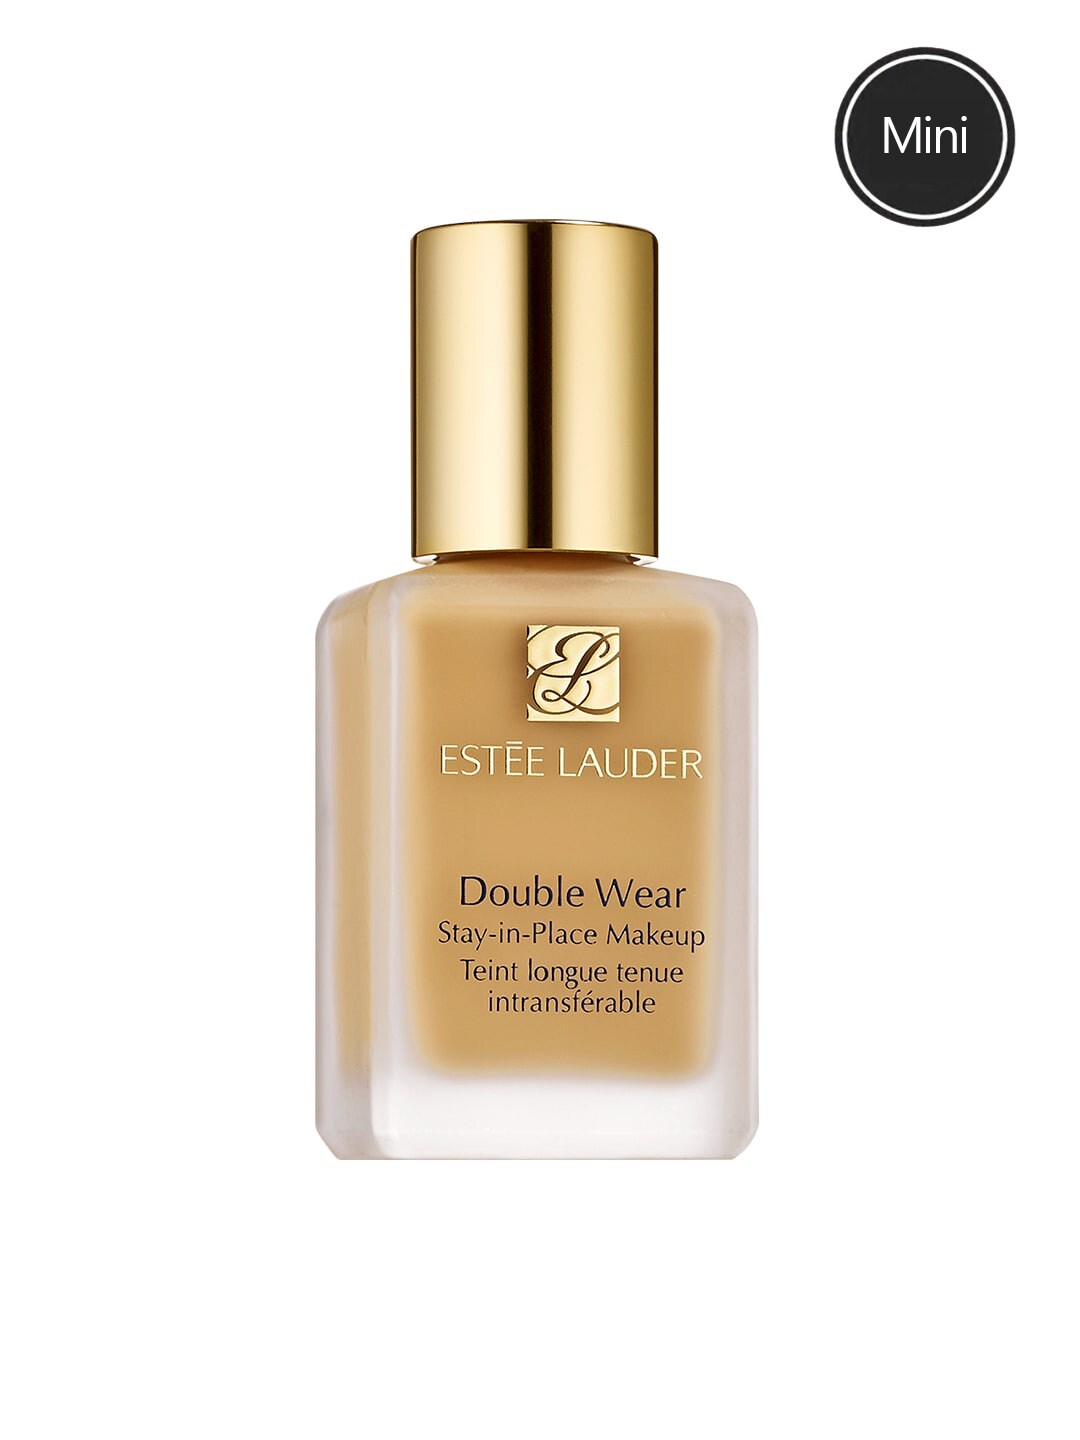 Estee Lauder Double Wear Stay-In-Place Makeup with SPF 10 - Rattan 2W2 15ml Price in India